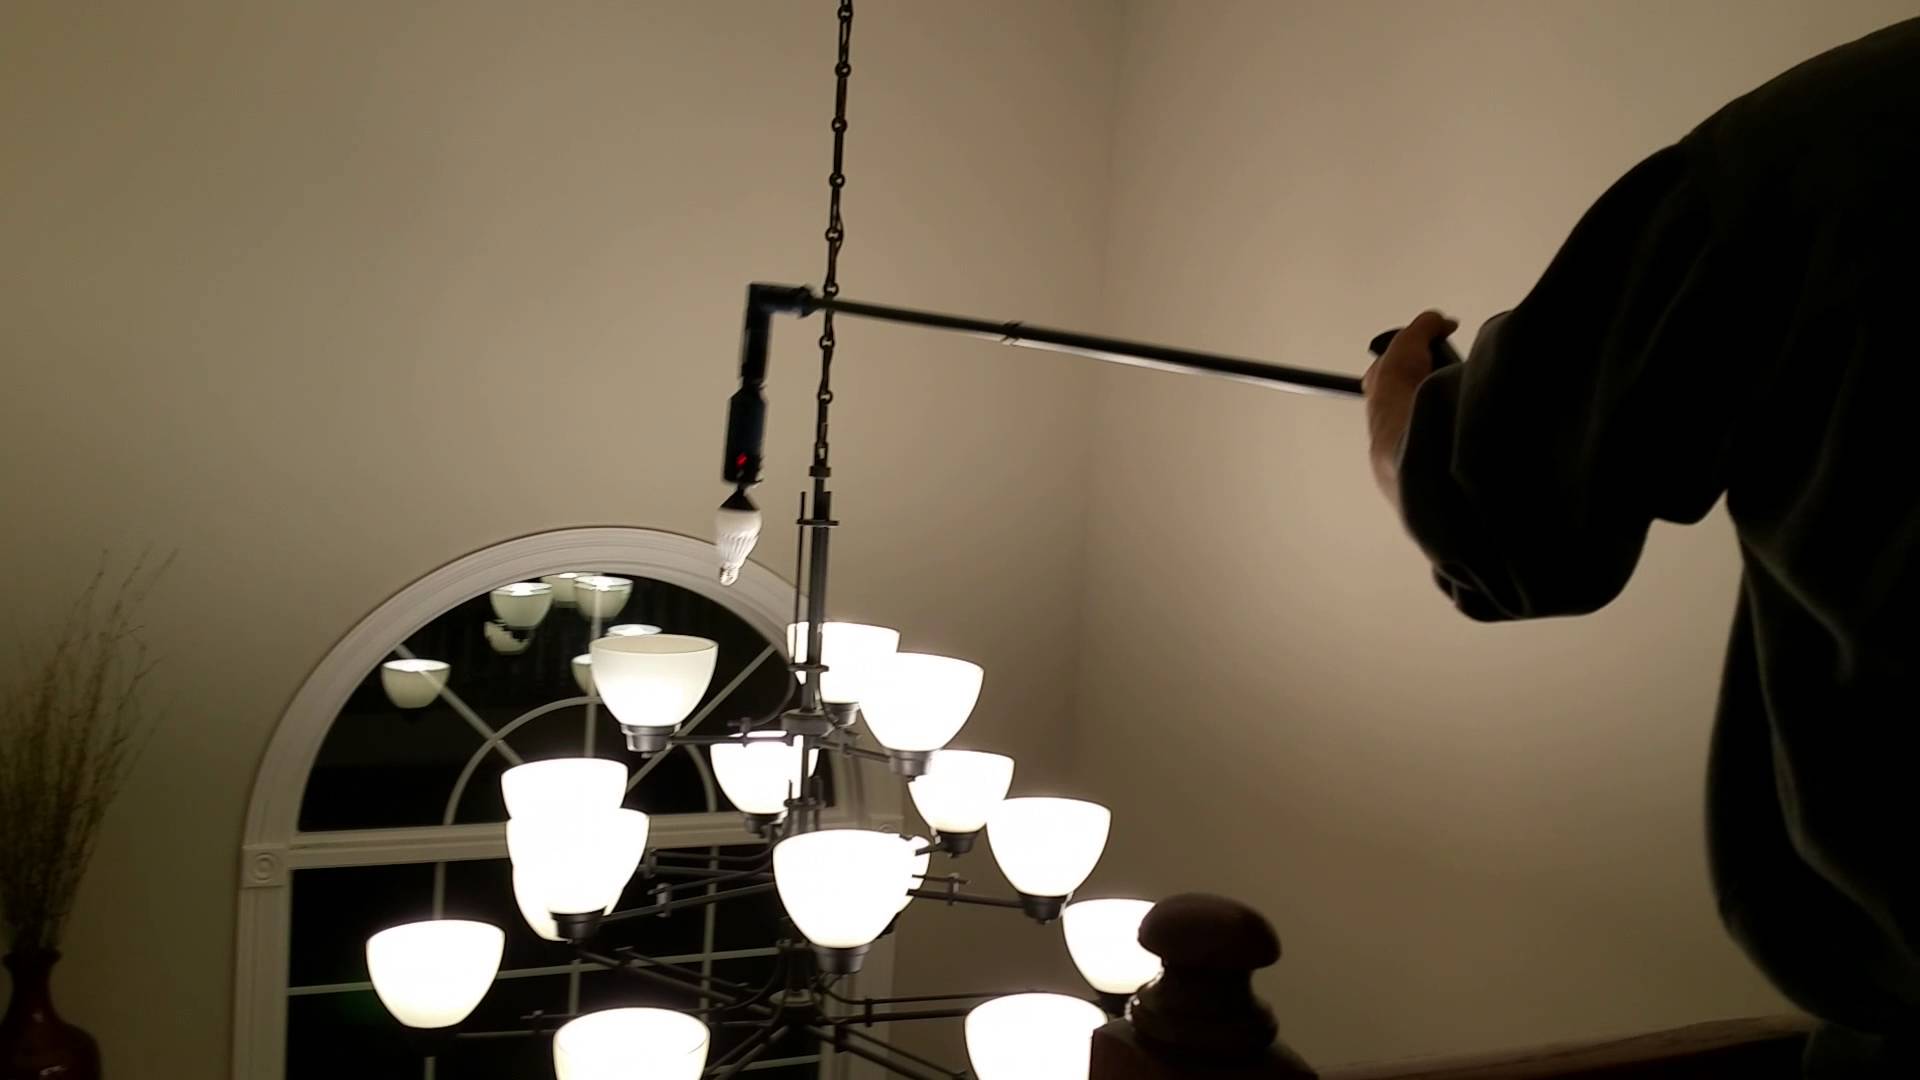 10 Reasons You Should Buy A High Ceiling Light Bulb Changer